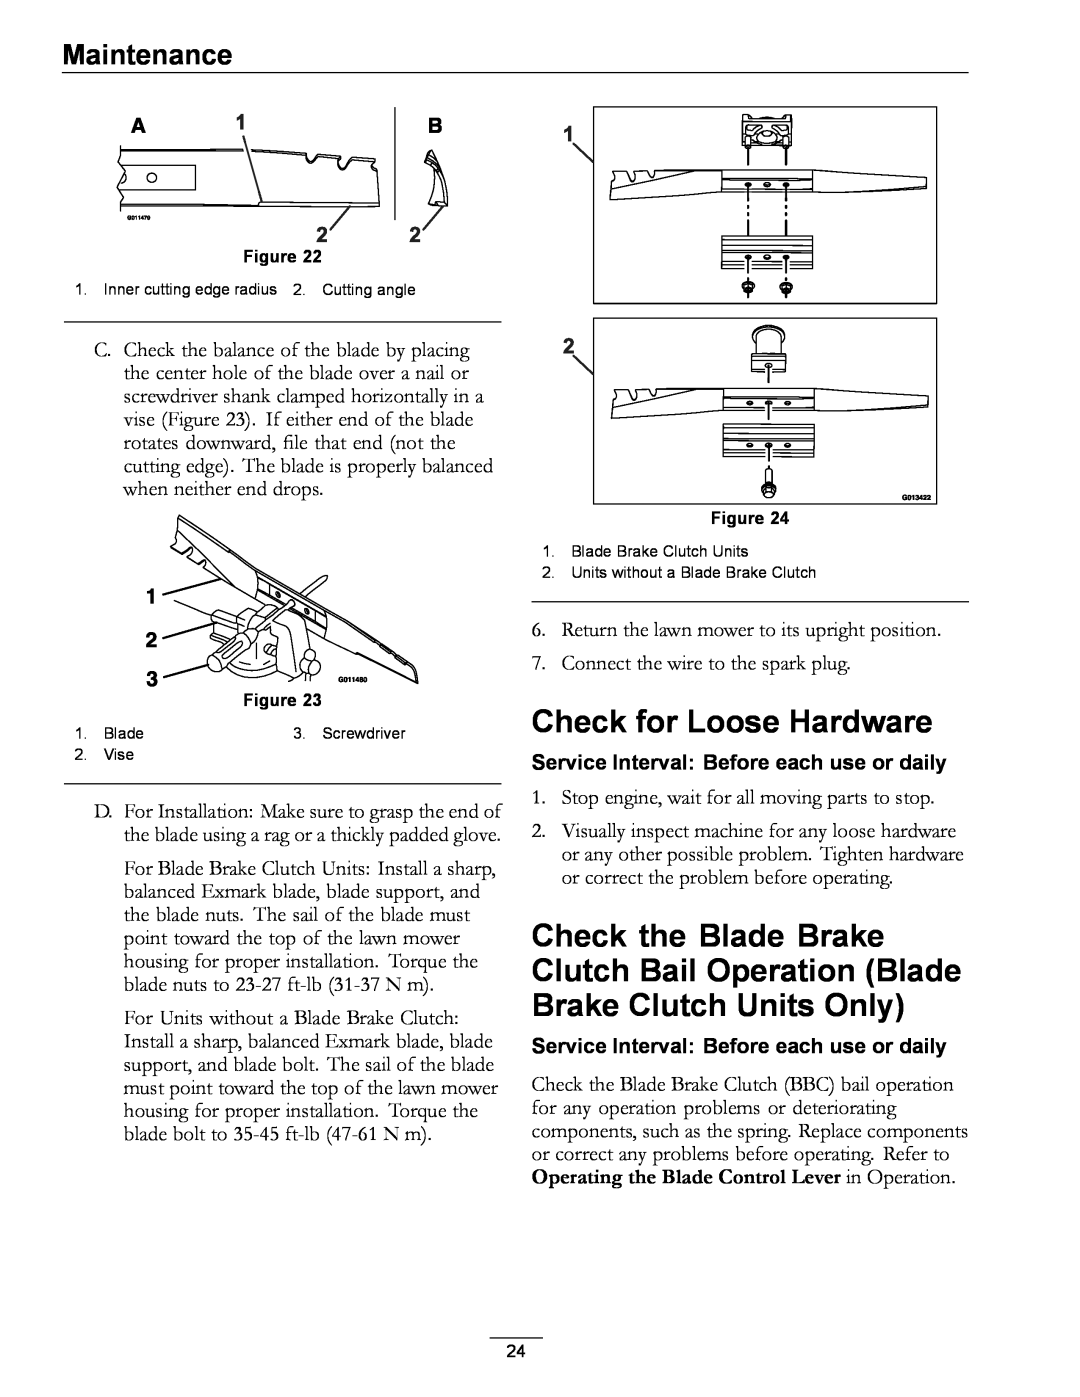 Exmark COMMERCIAL 21 Check for Loose Hardware, Check the Blade Brake Clutch Bail Operation Blade, Brake Clutch Units Only 